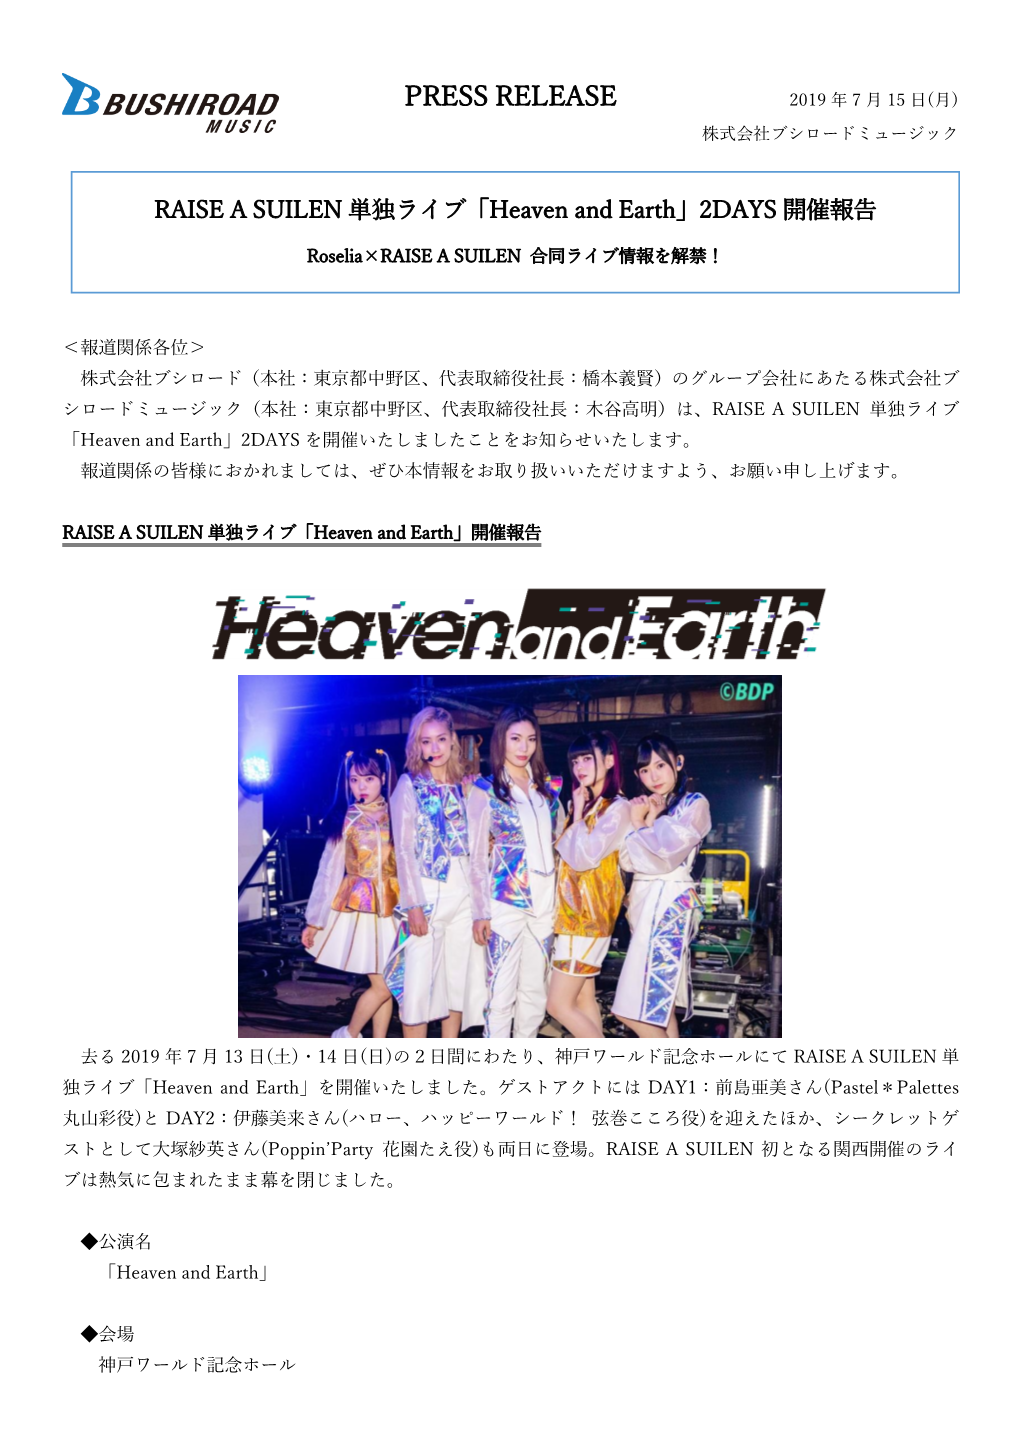 Heaven and Earth」2DAYS 開催報告